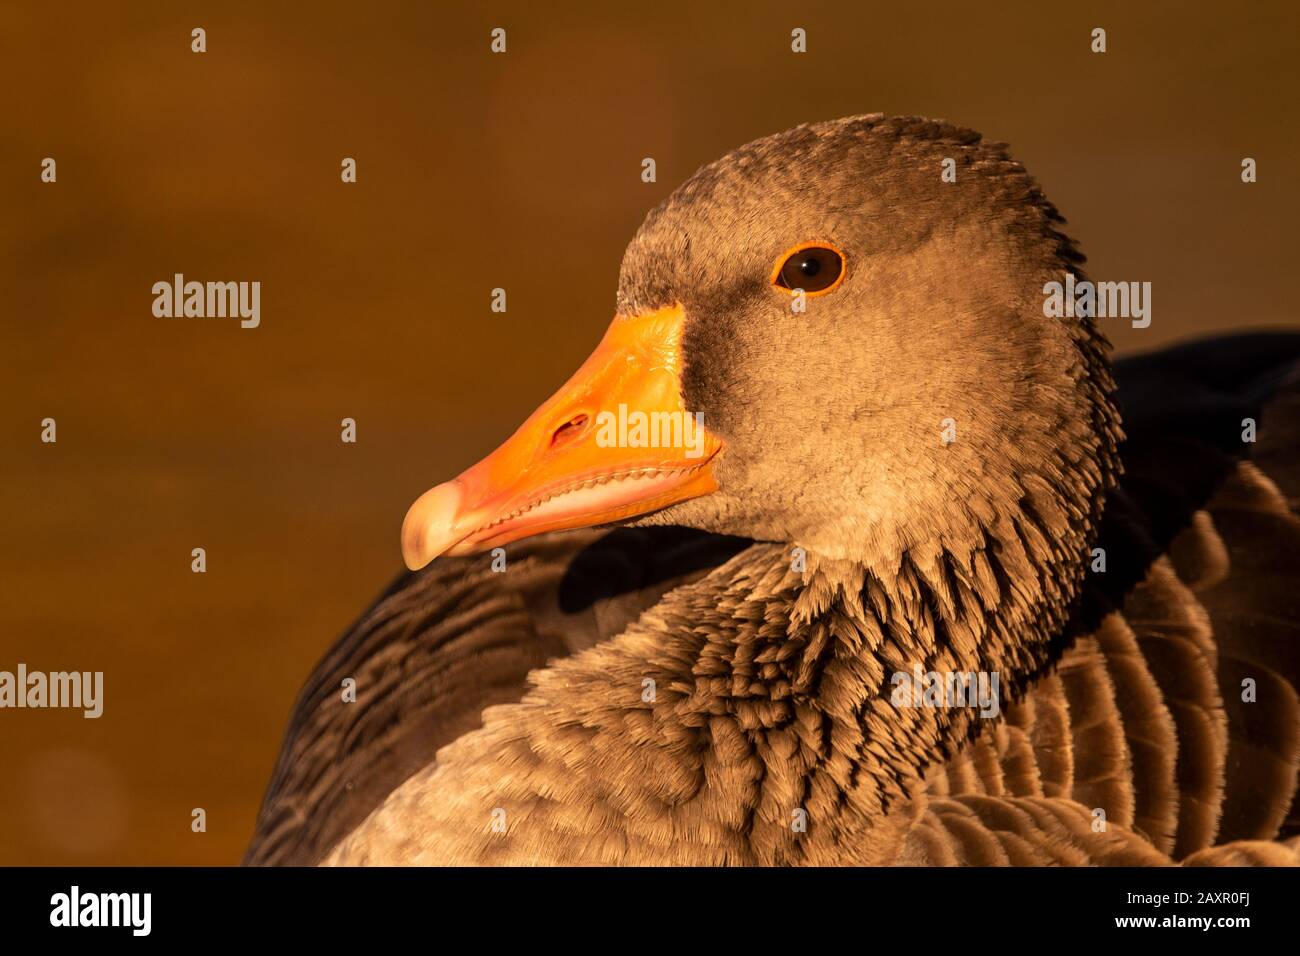 A greylag goose portrayed in the golden evening light Stock Photo